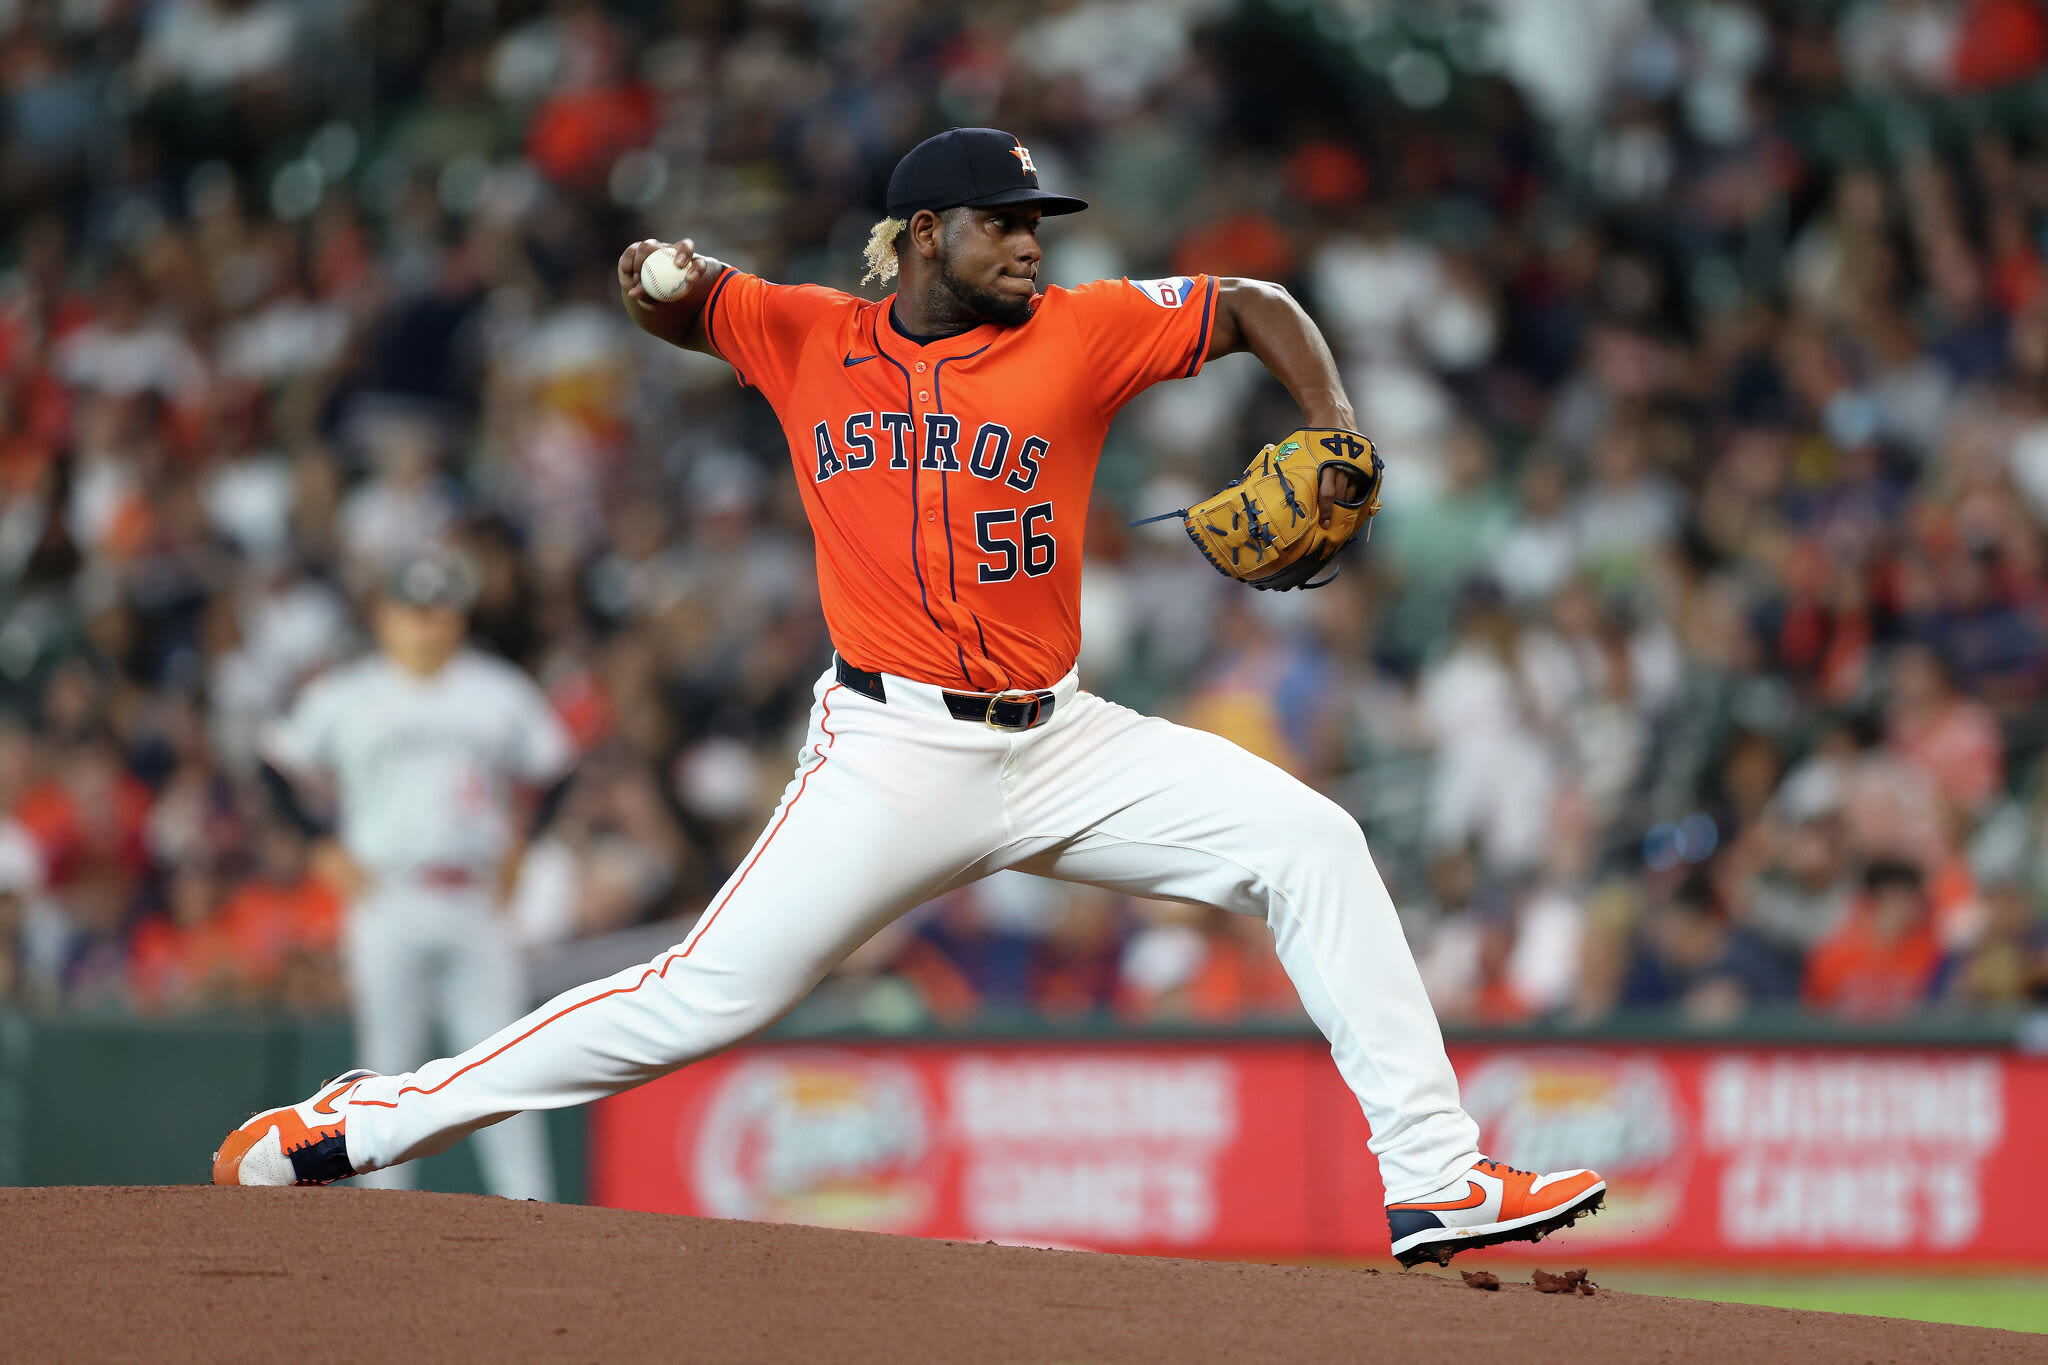 Newfound star struggles as Astros limp through end of May